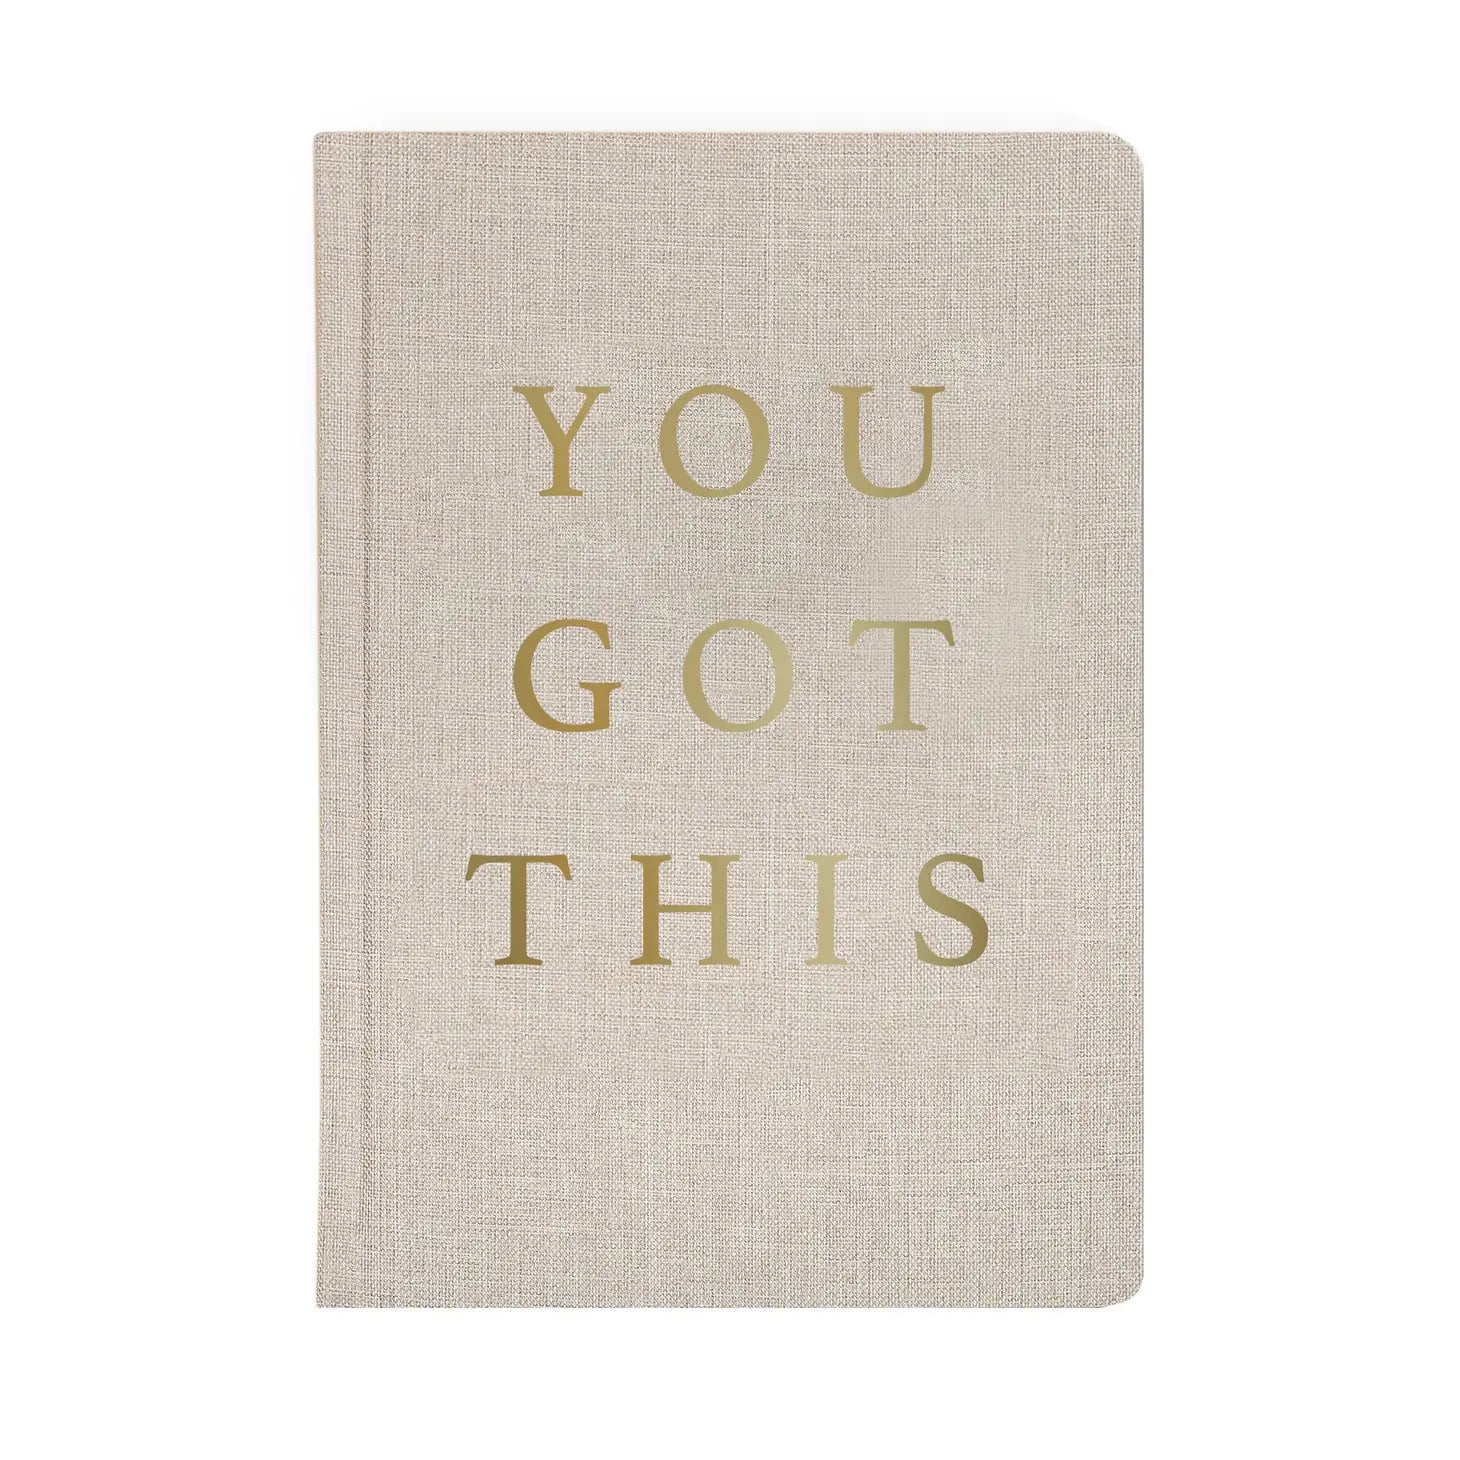 You've Got This Journal